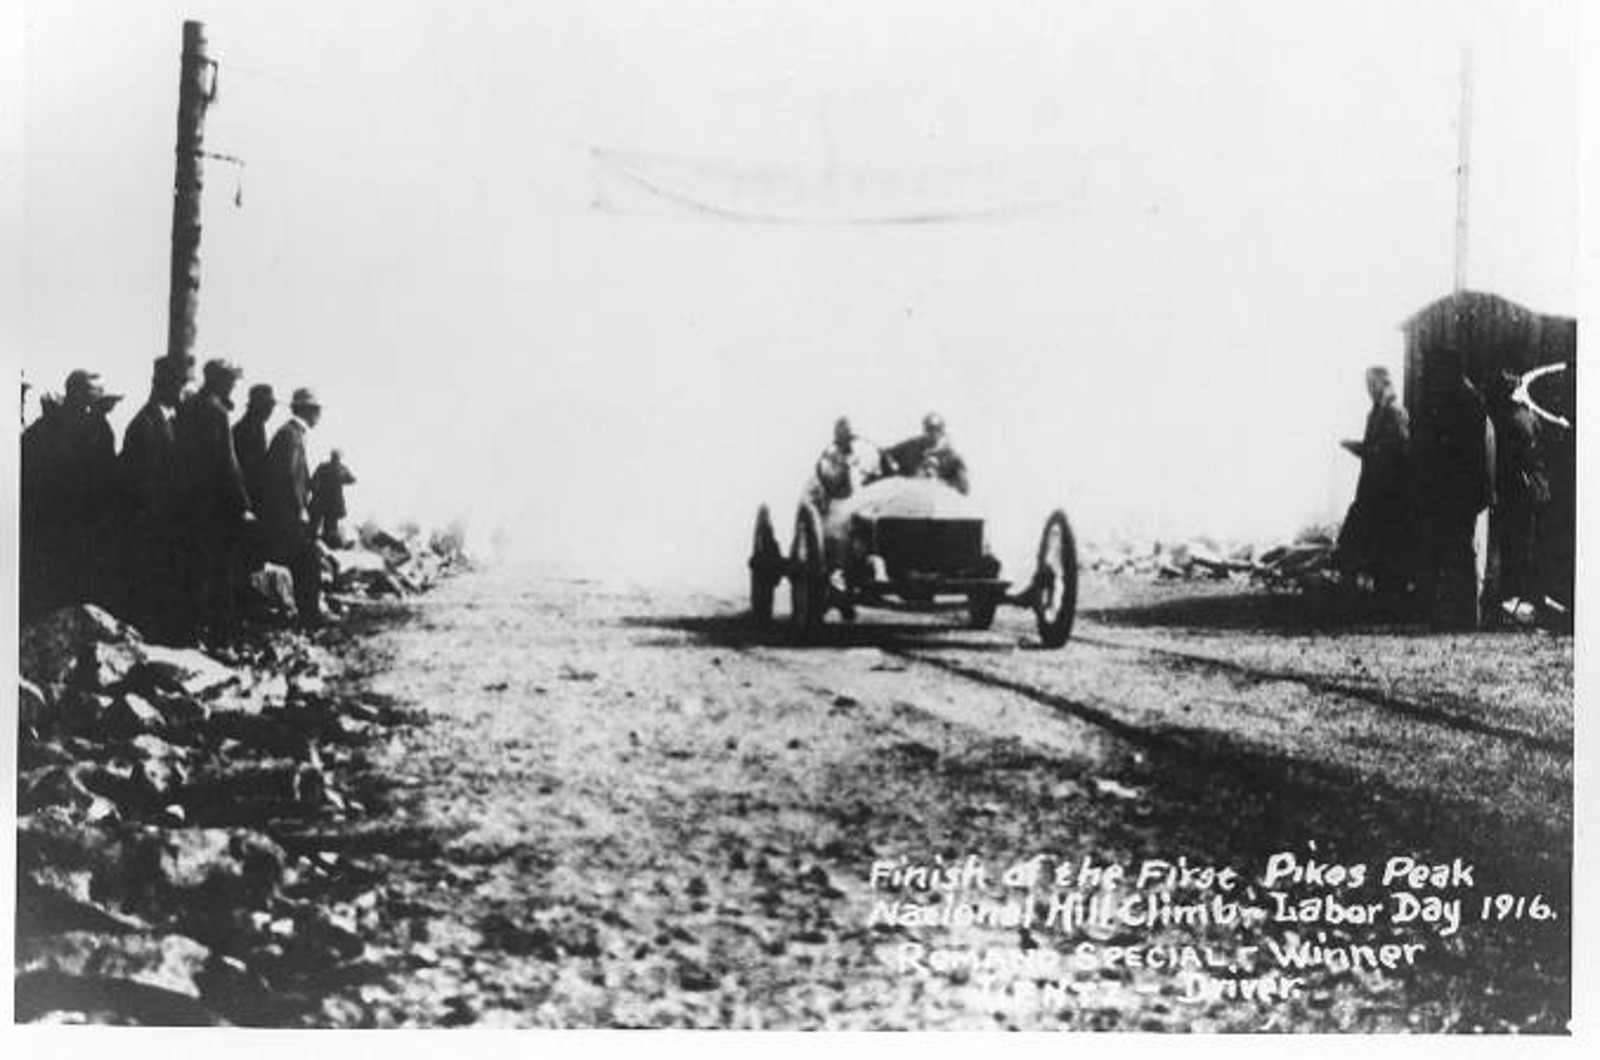 <p>The inaugural Pikes Peak event was held in August 1916 and must have been a drastically different affair to today’s International Hill Climb. The winner of that first-ever climb was 22-year-old Rea Lentz behind the wheel of the Romano Demon Special.</p><p>This unique race car was the smallest to enter in that year’s event. Lentz was also the youngest driver, but secured victory with a time of 20 minutes and 55.6 seconds. Strangely, he was never heard from again following his appearance at Pikes Peak. The event would not be held again until 1920 due to the First World War.</p>